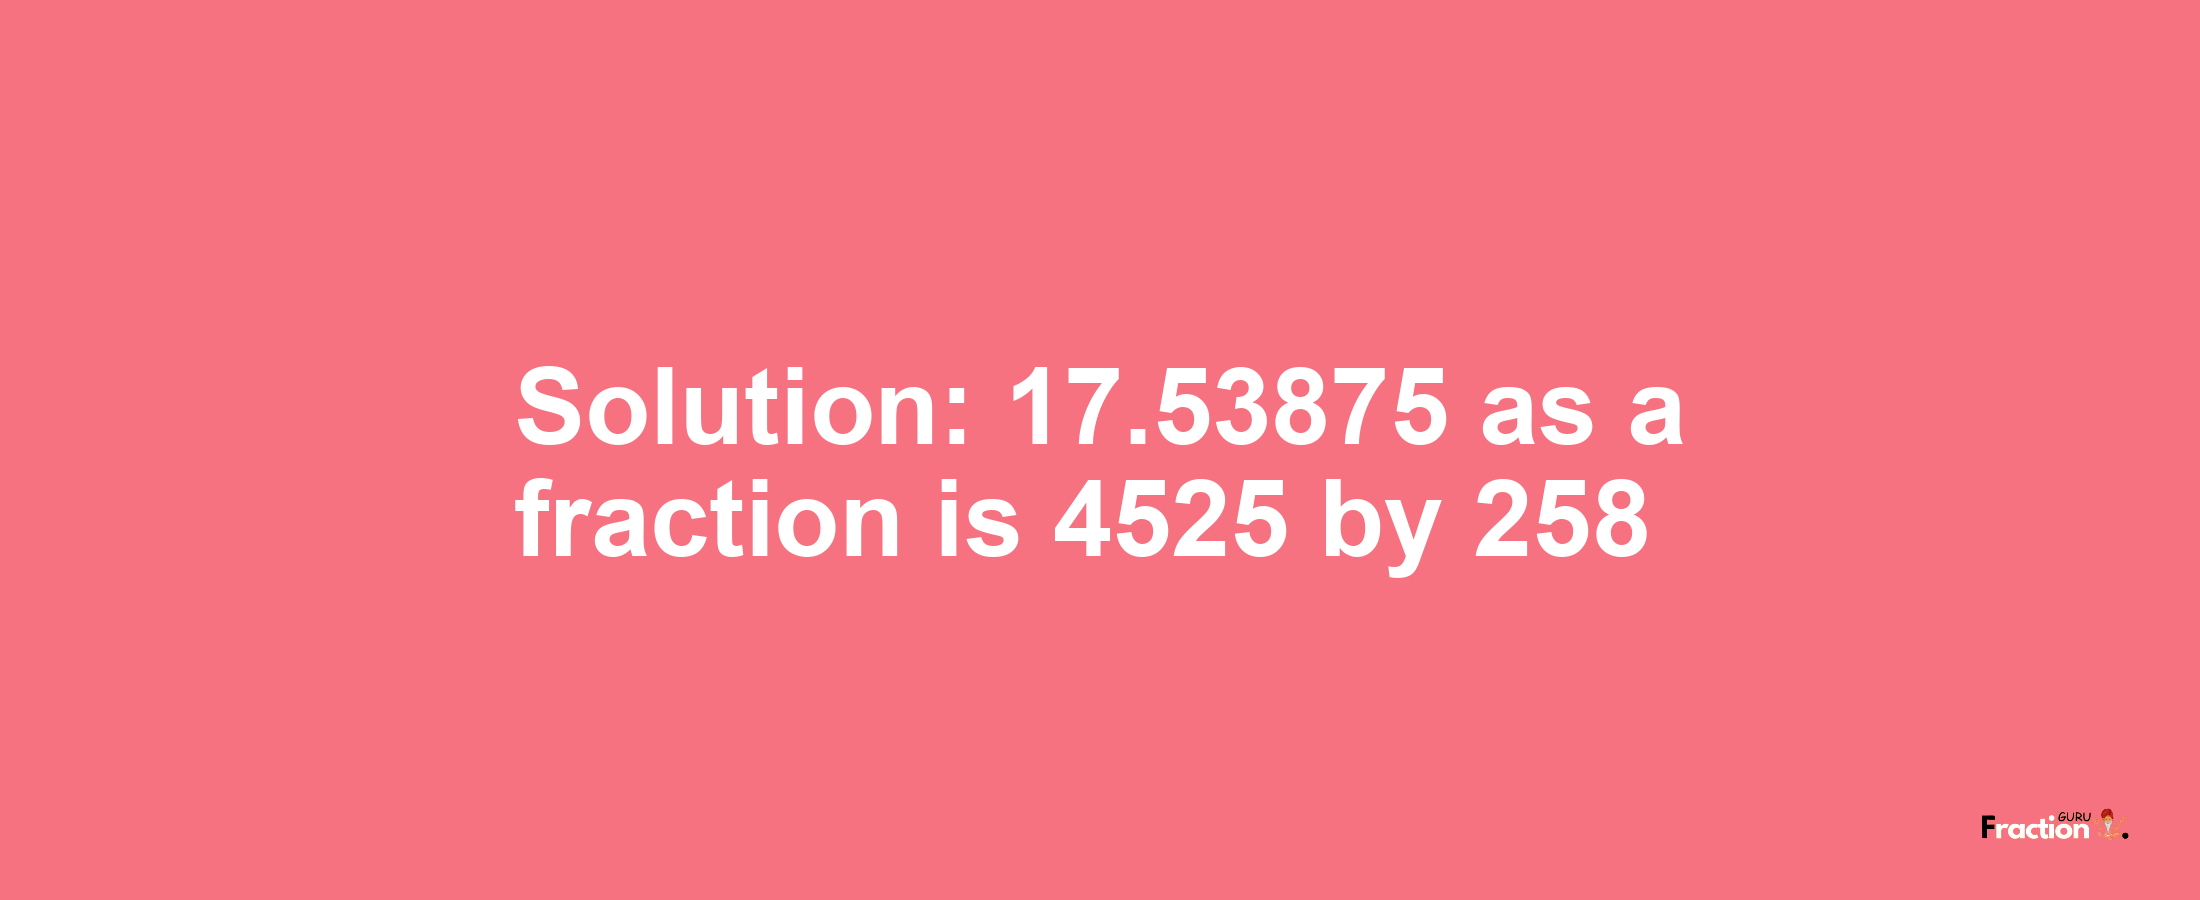 Solution:17.53875 as a fraction is 4525/258